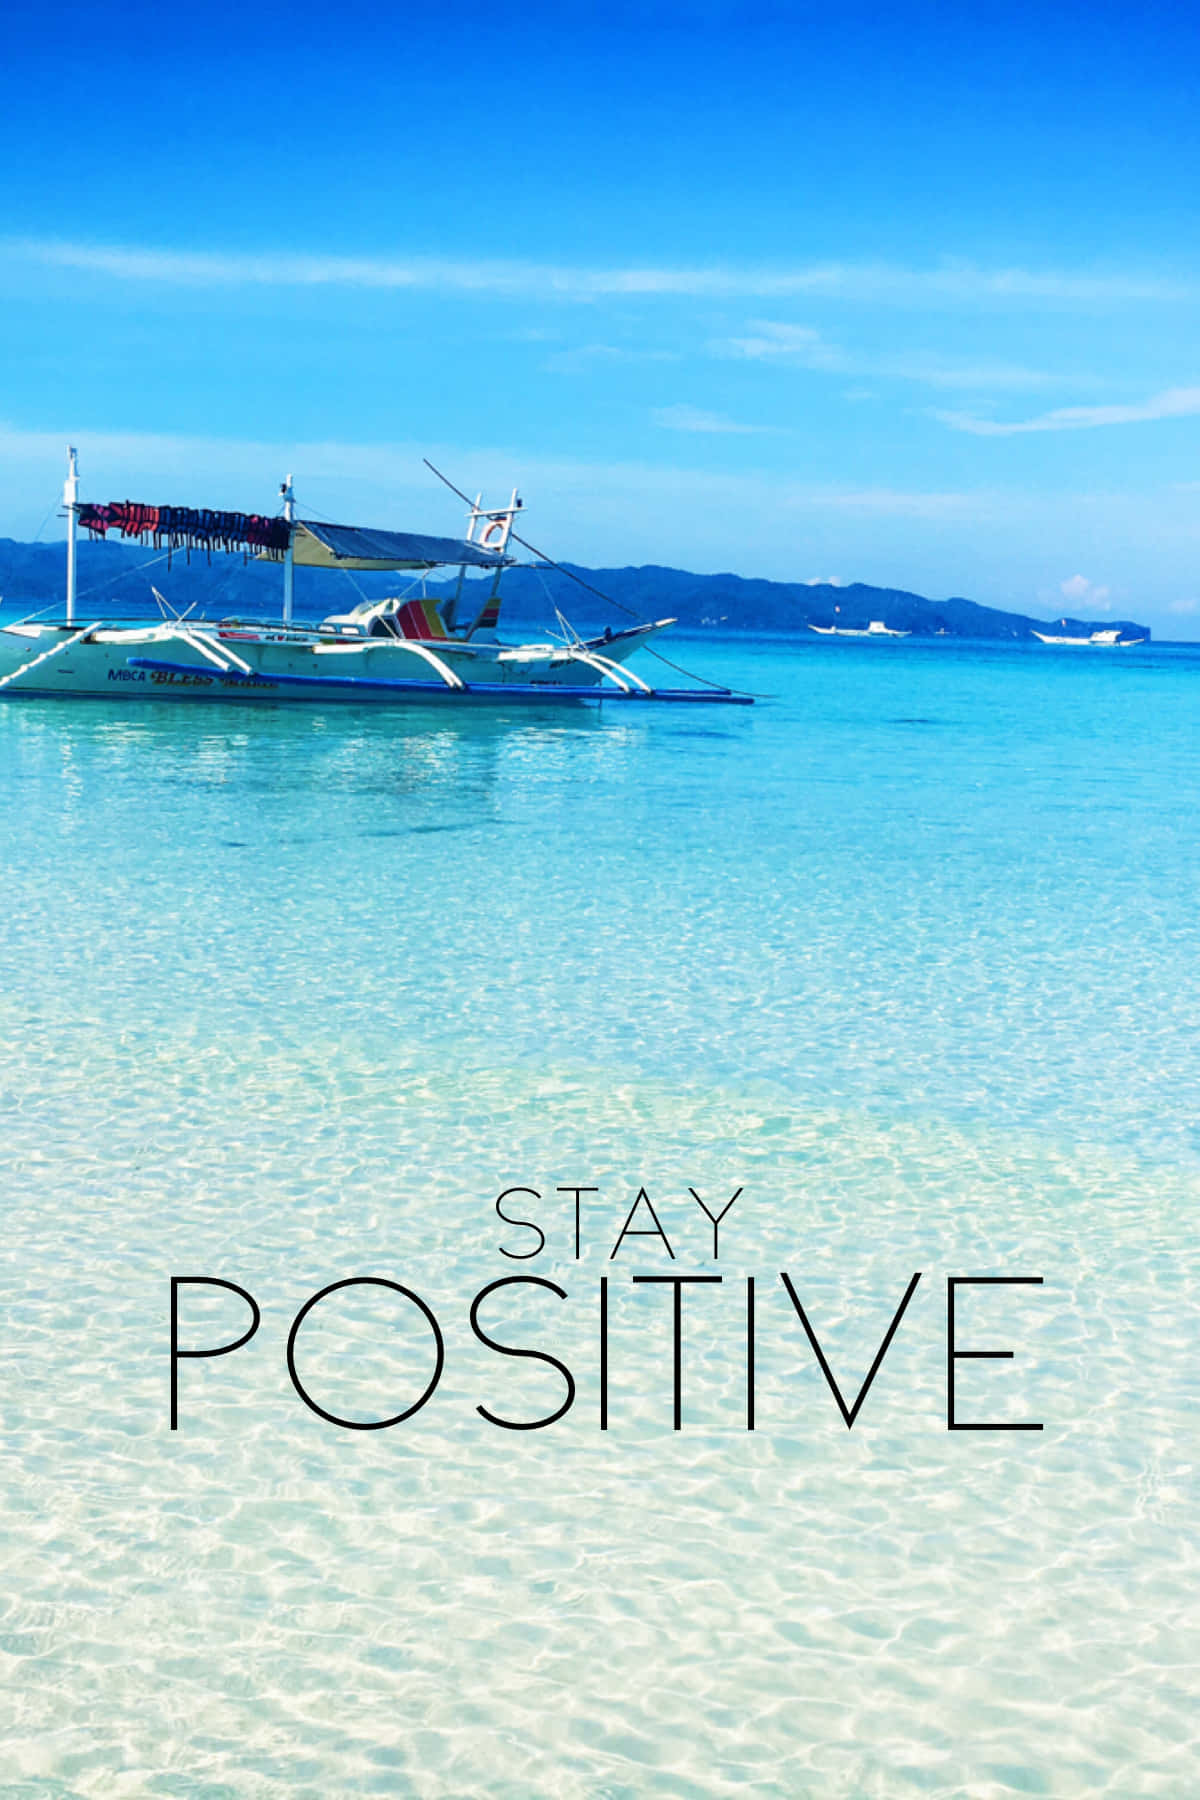 Stay Positive Quotes Wallpaper